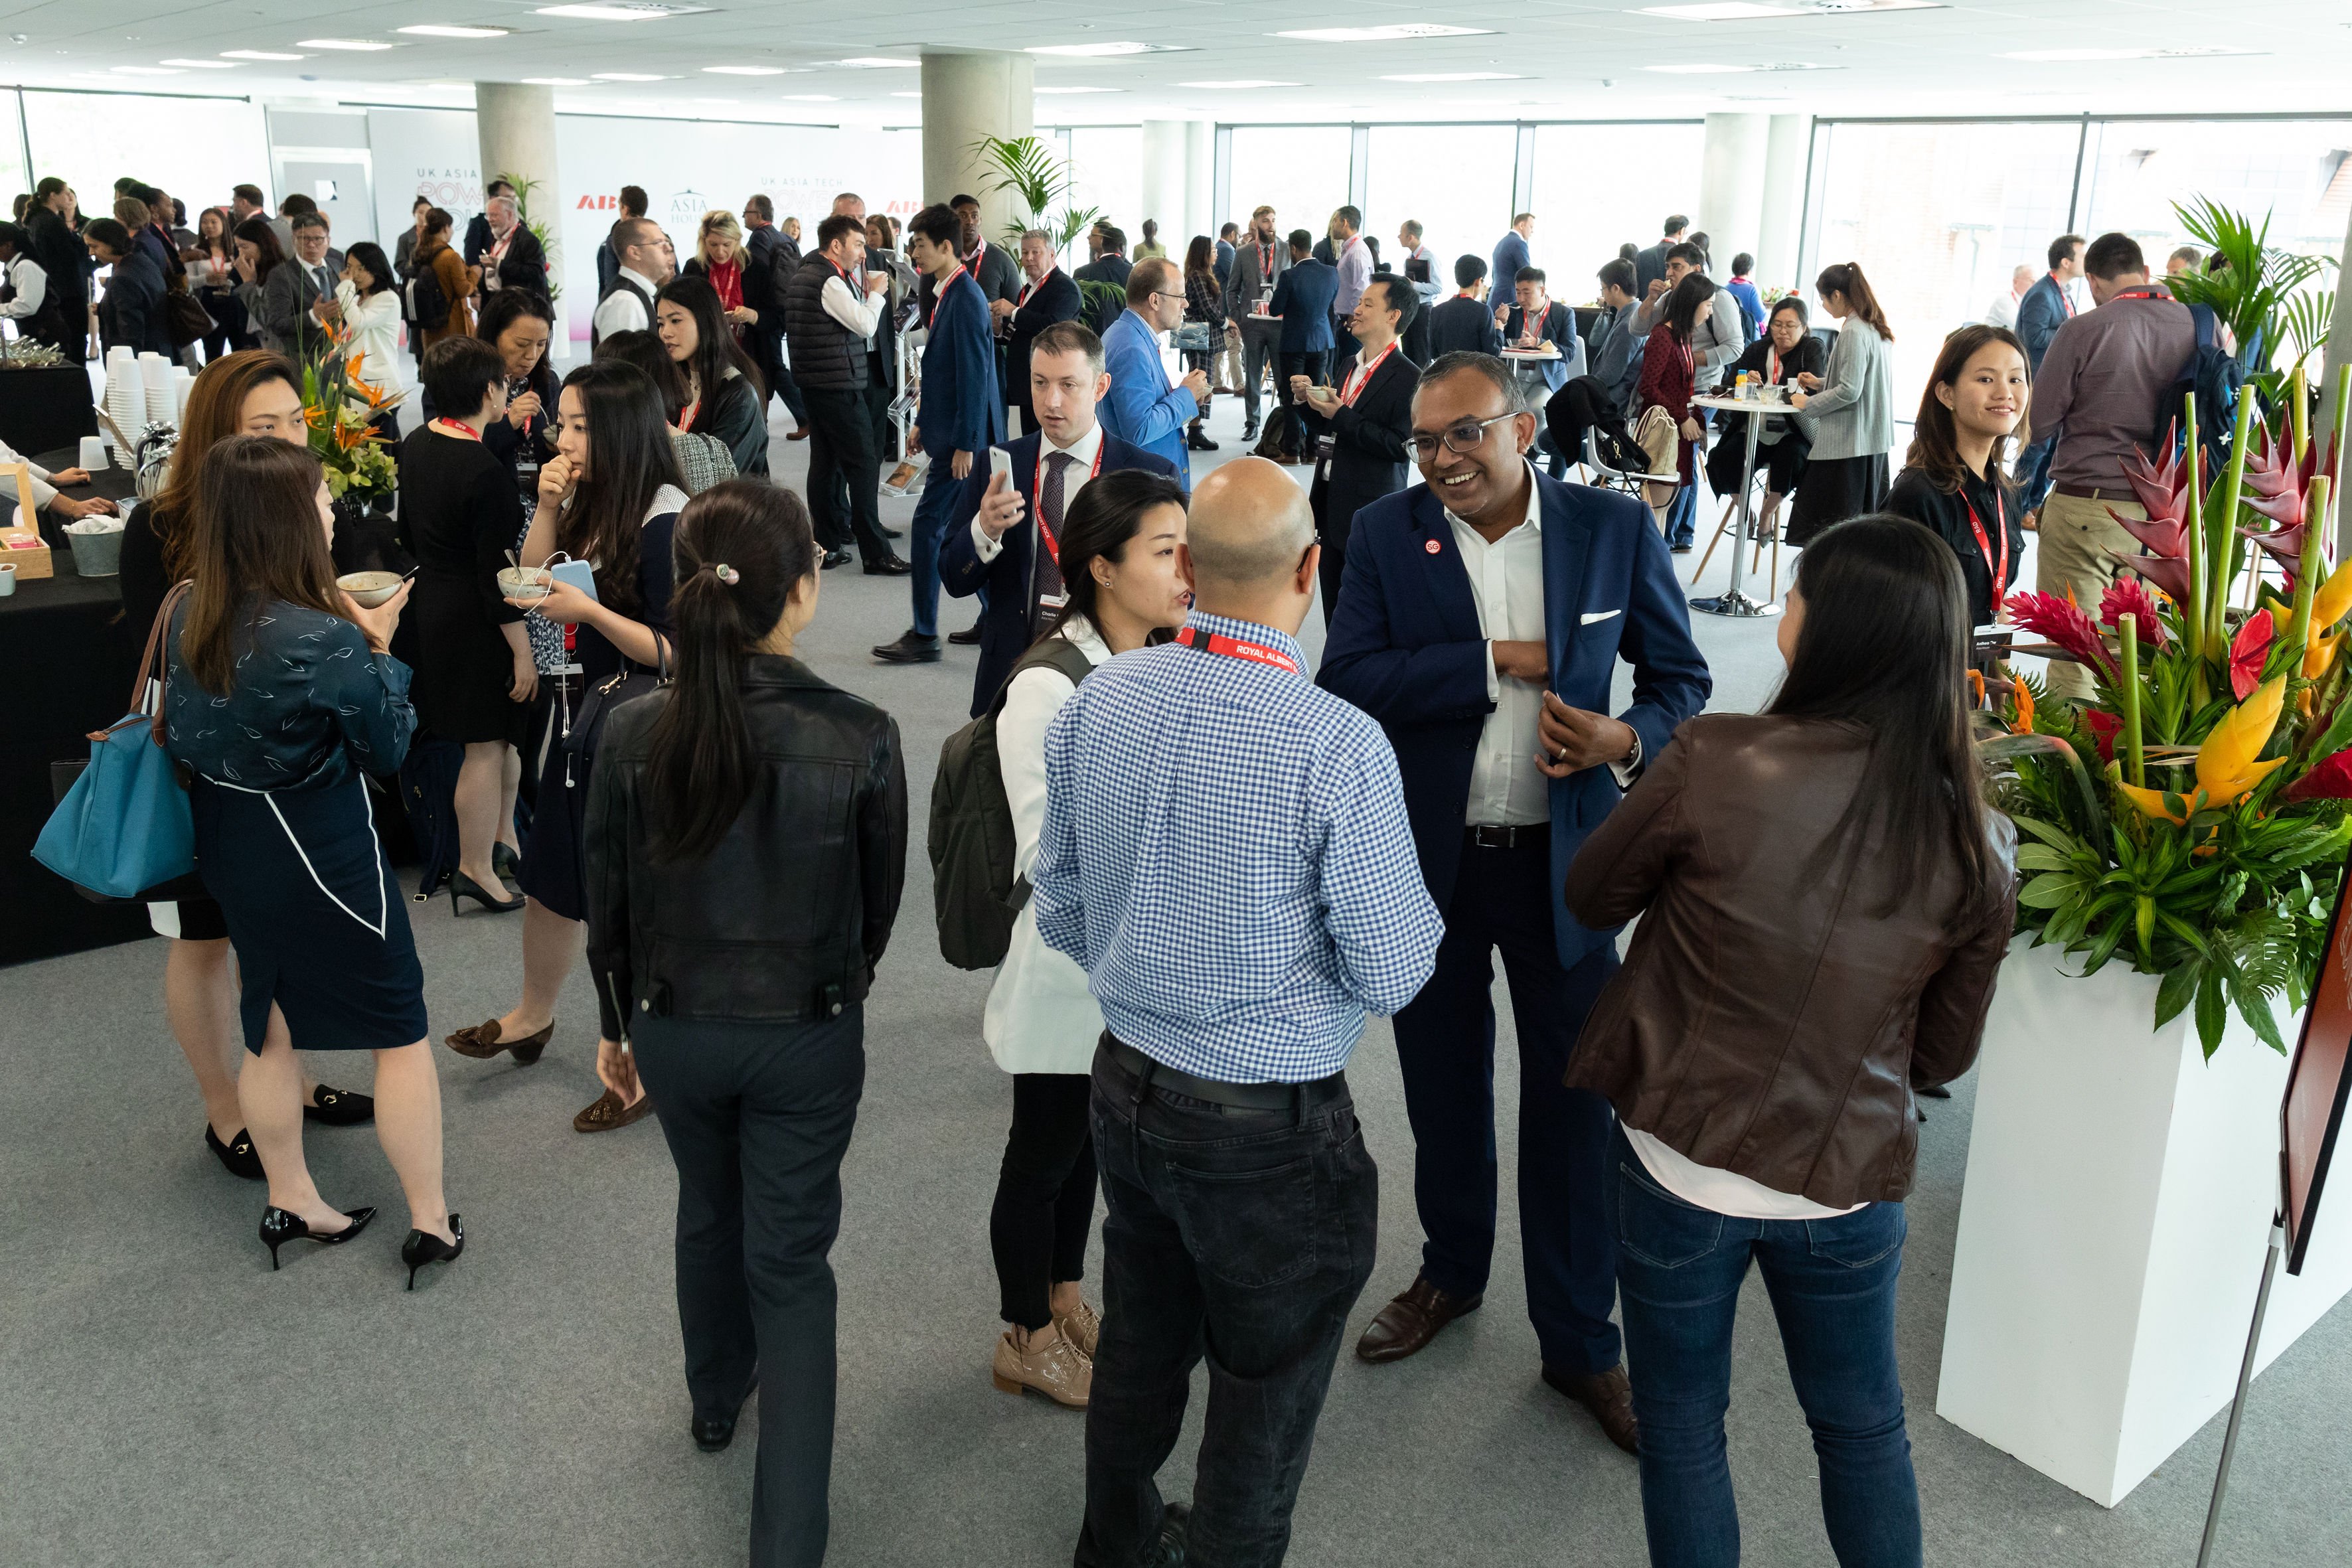 A networking event at the Royal Docks